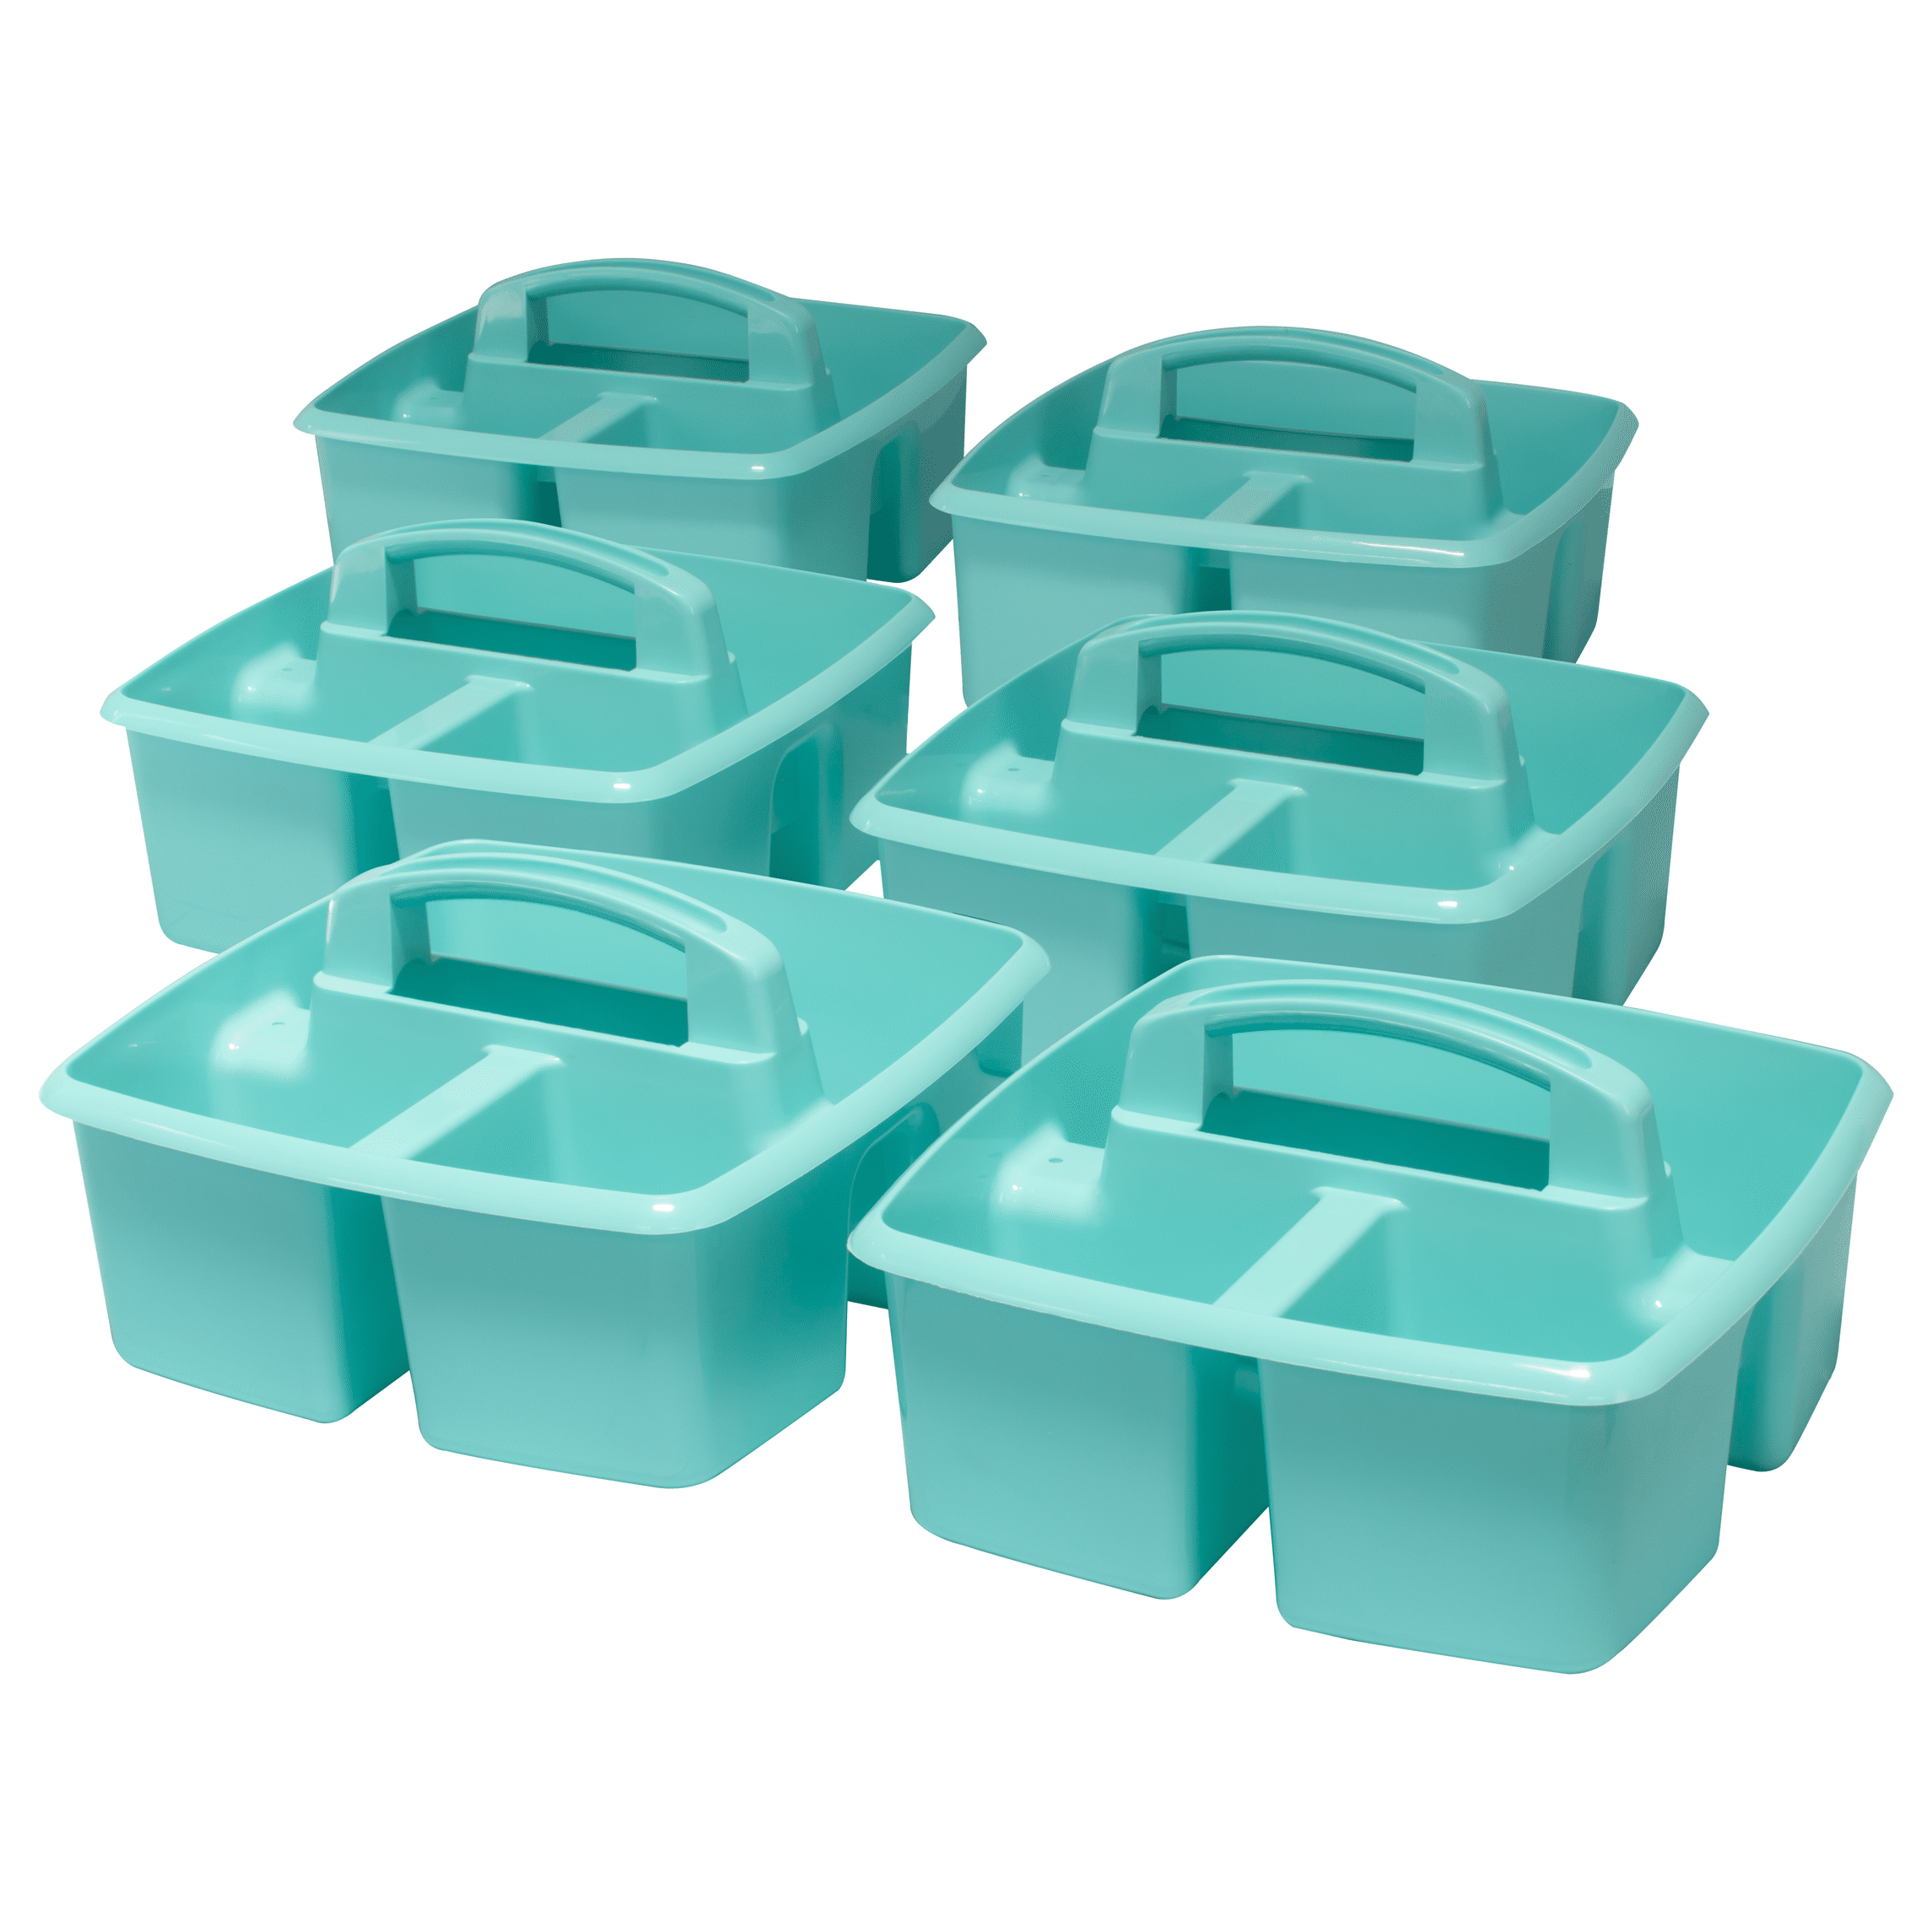 Storex Small Caddy, 9-1/4 x 9-1/4 x 5-1/4 Inches, Green, Pack of 6